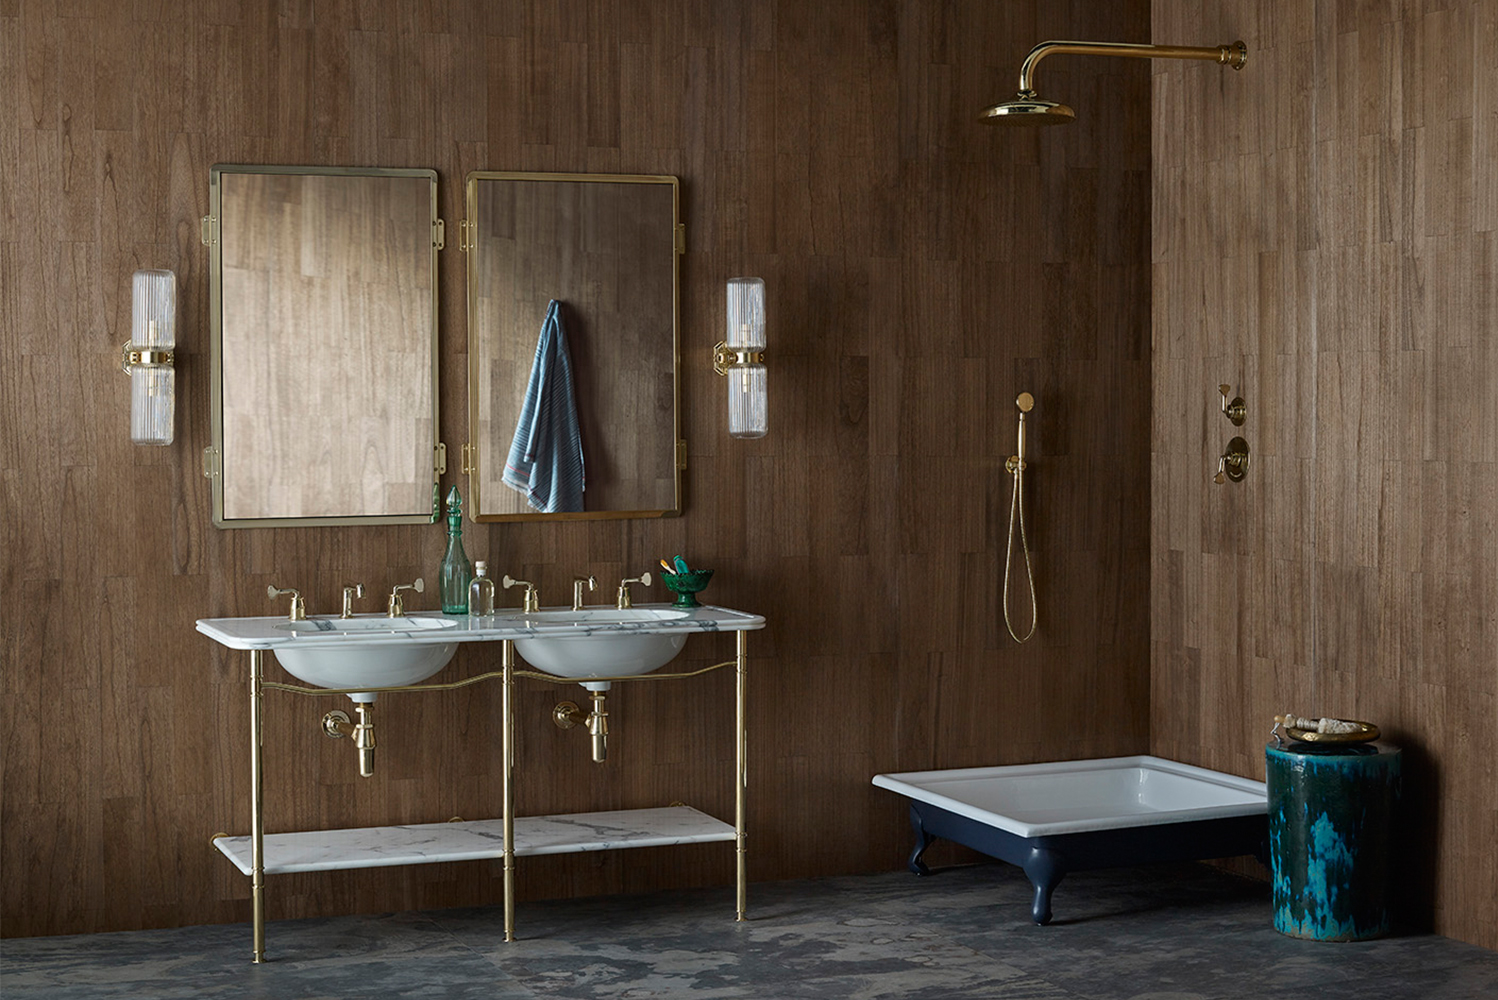 The new Leawood tap and shower collection was designed by Martin Brudnizki for Drummonds